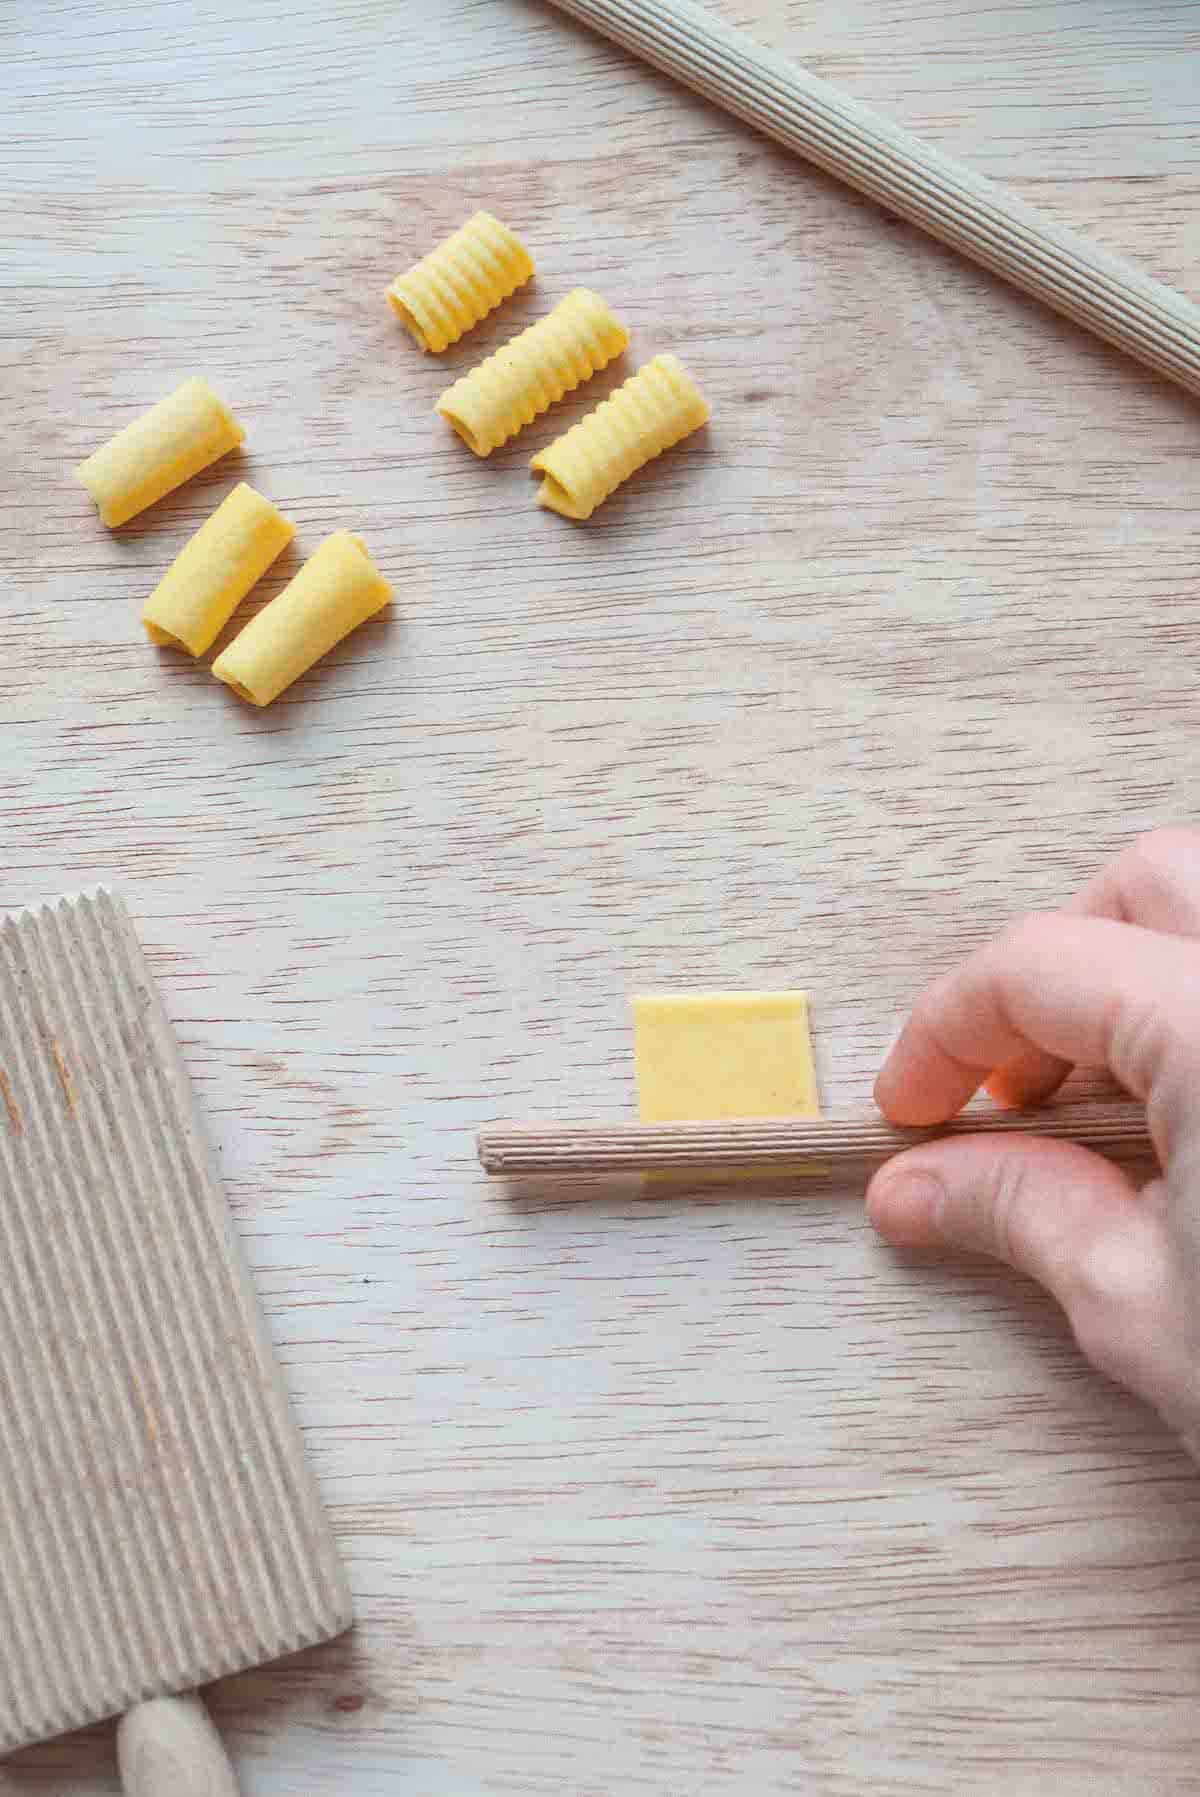 Pressing a ridged wooden dowel into a square of pasta dough in order to make a macaroni shape like the 6 macaronis lying just above the square of dough and dowel.